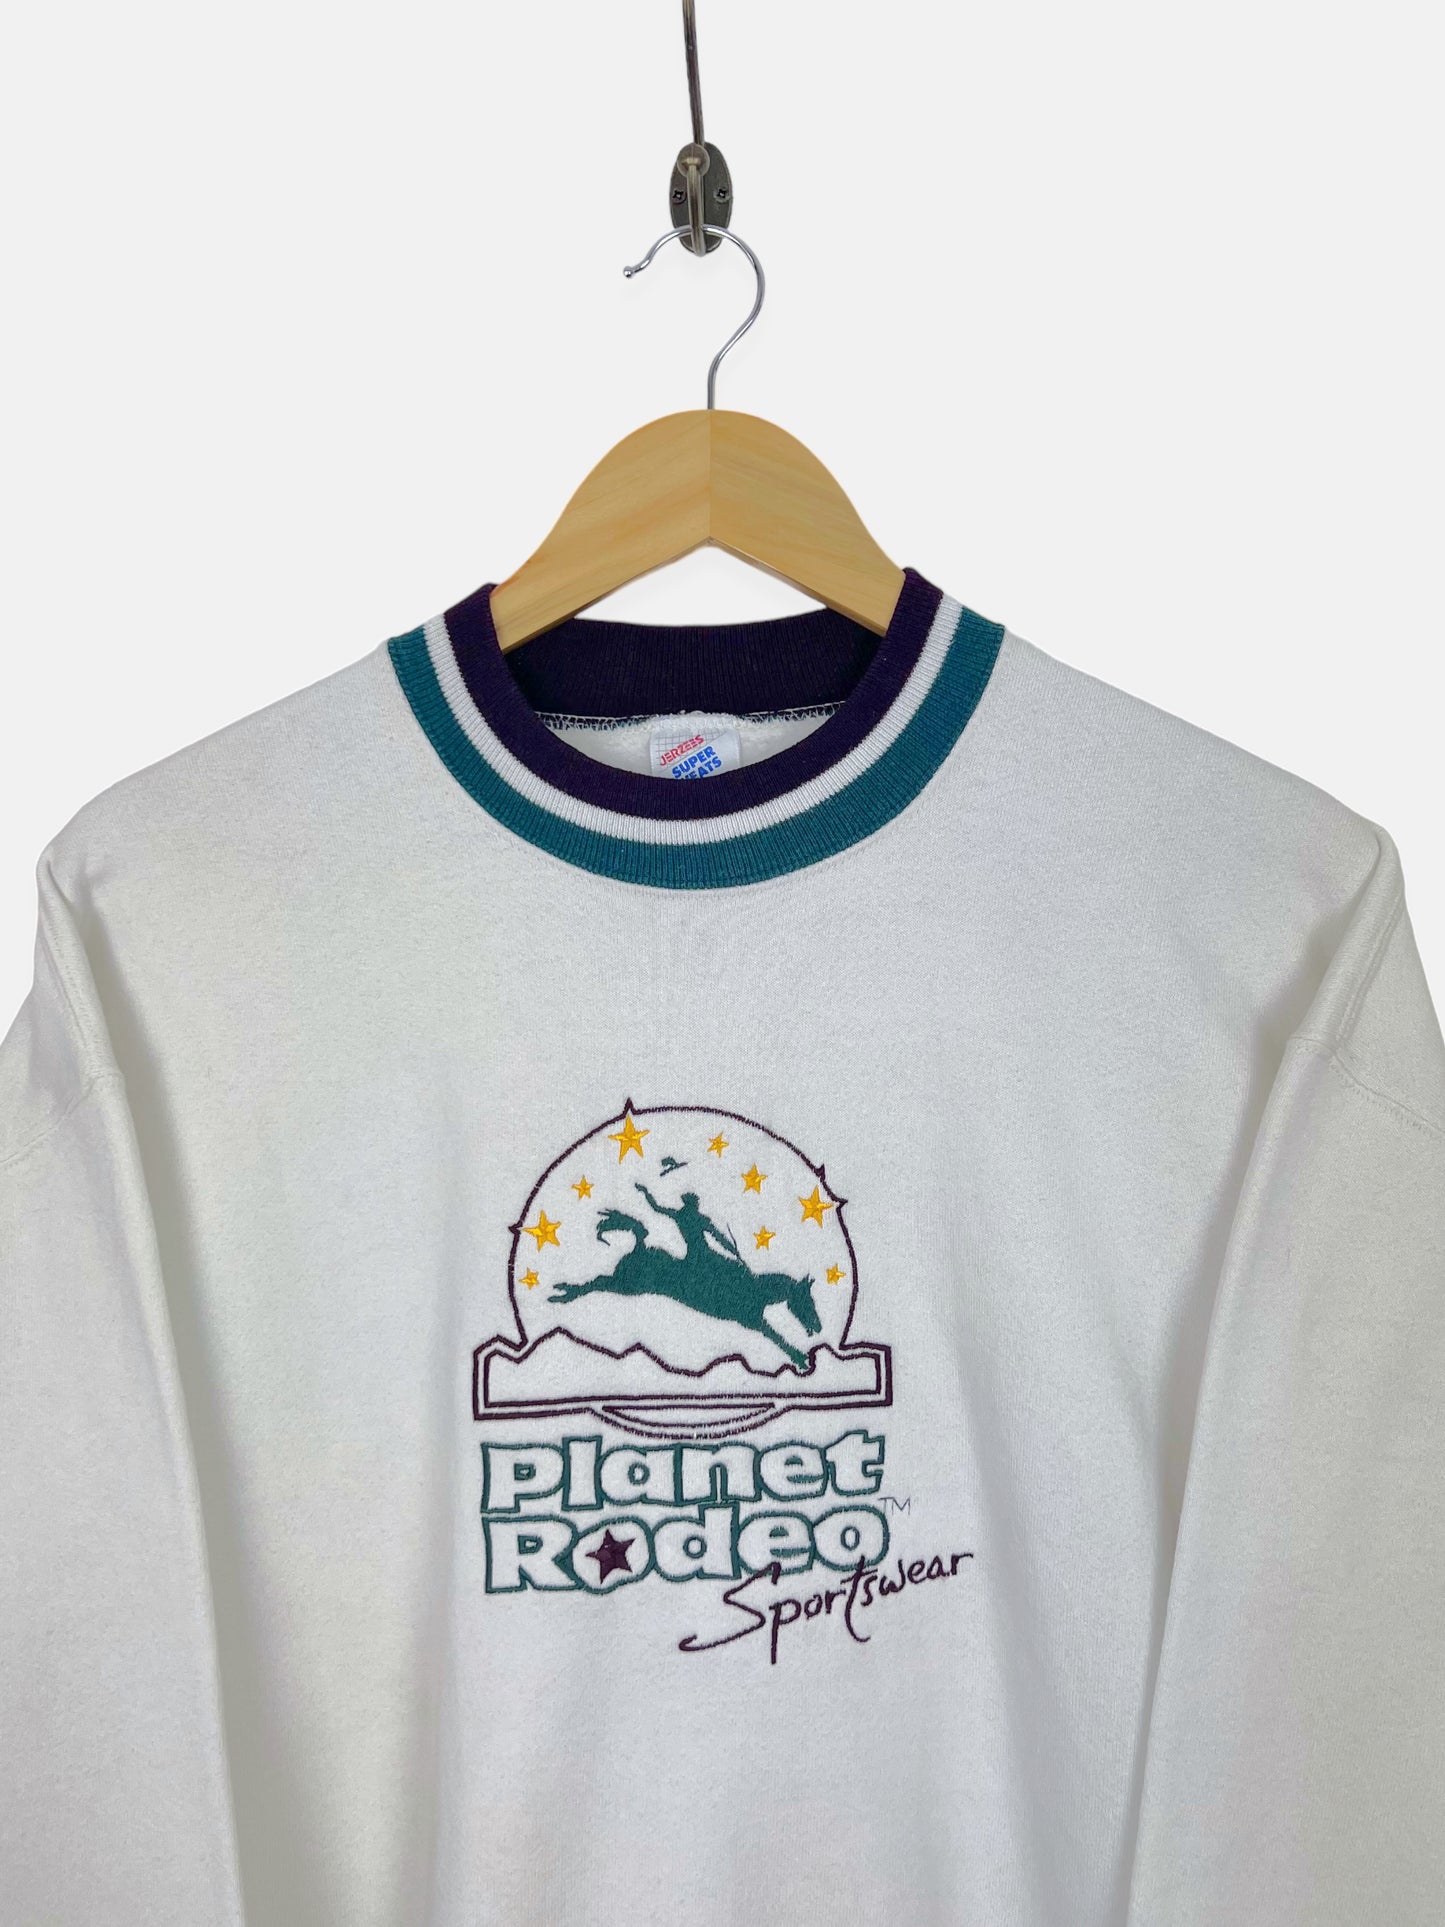 90's Planet Rodeo USA Made Embroidered Vintage Sweatshirt Size M